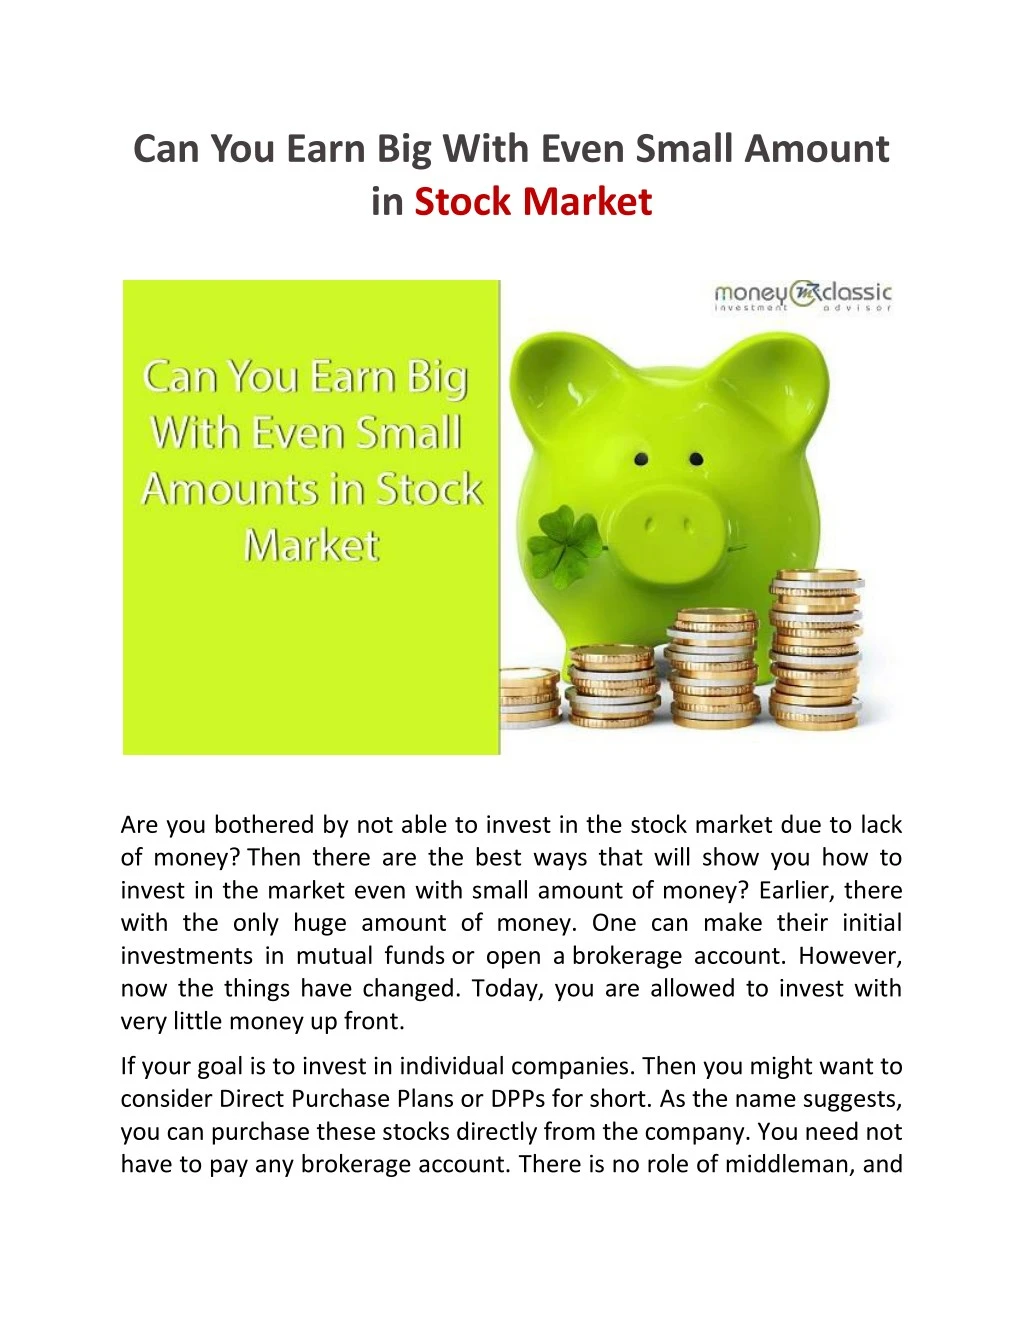 can you earn big with even small amount in stock